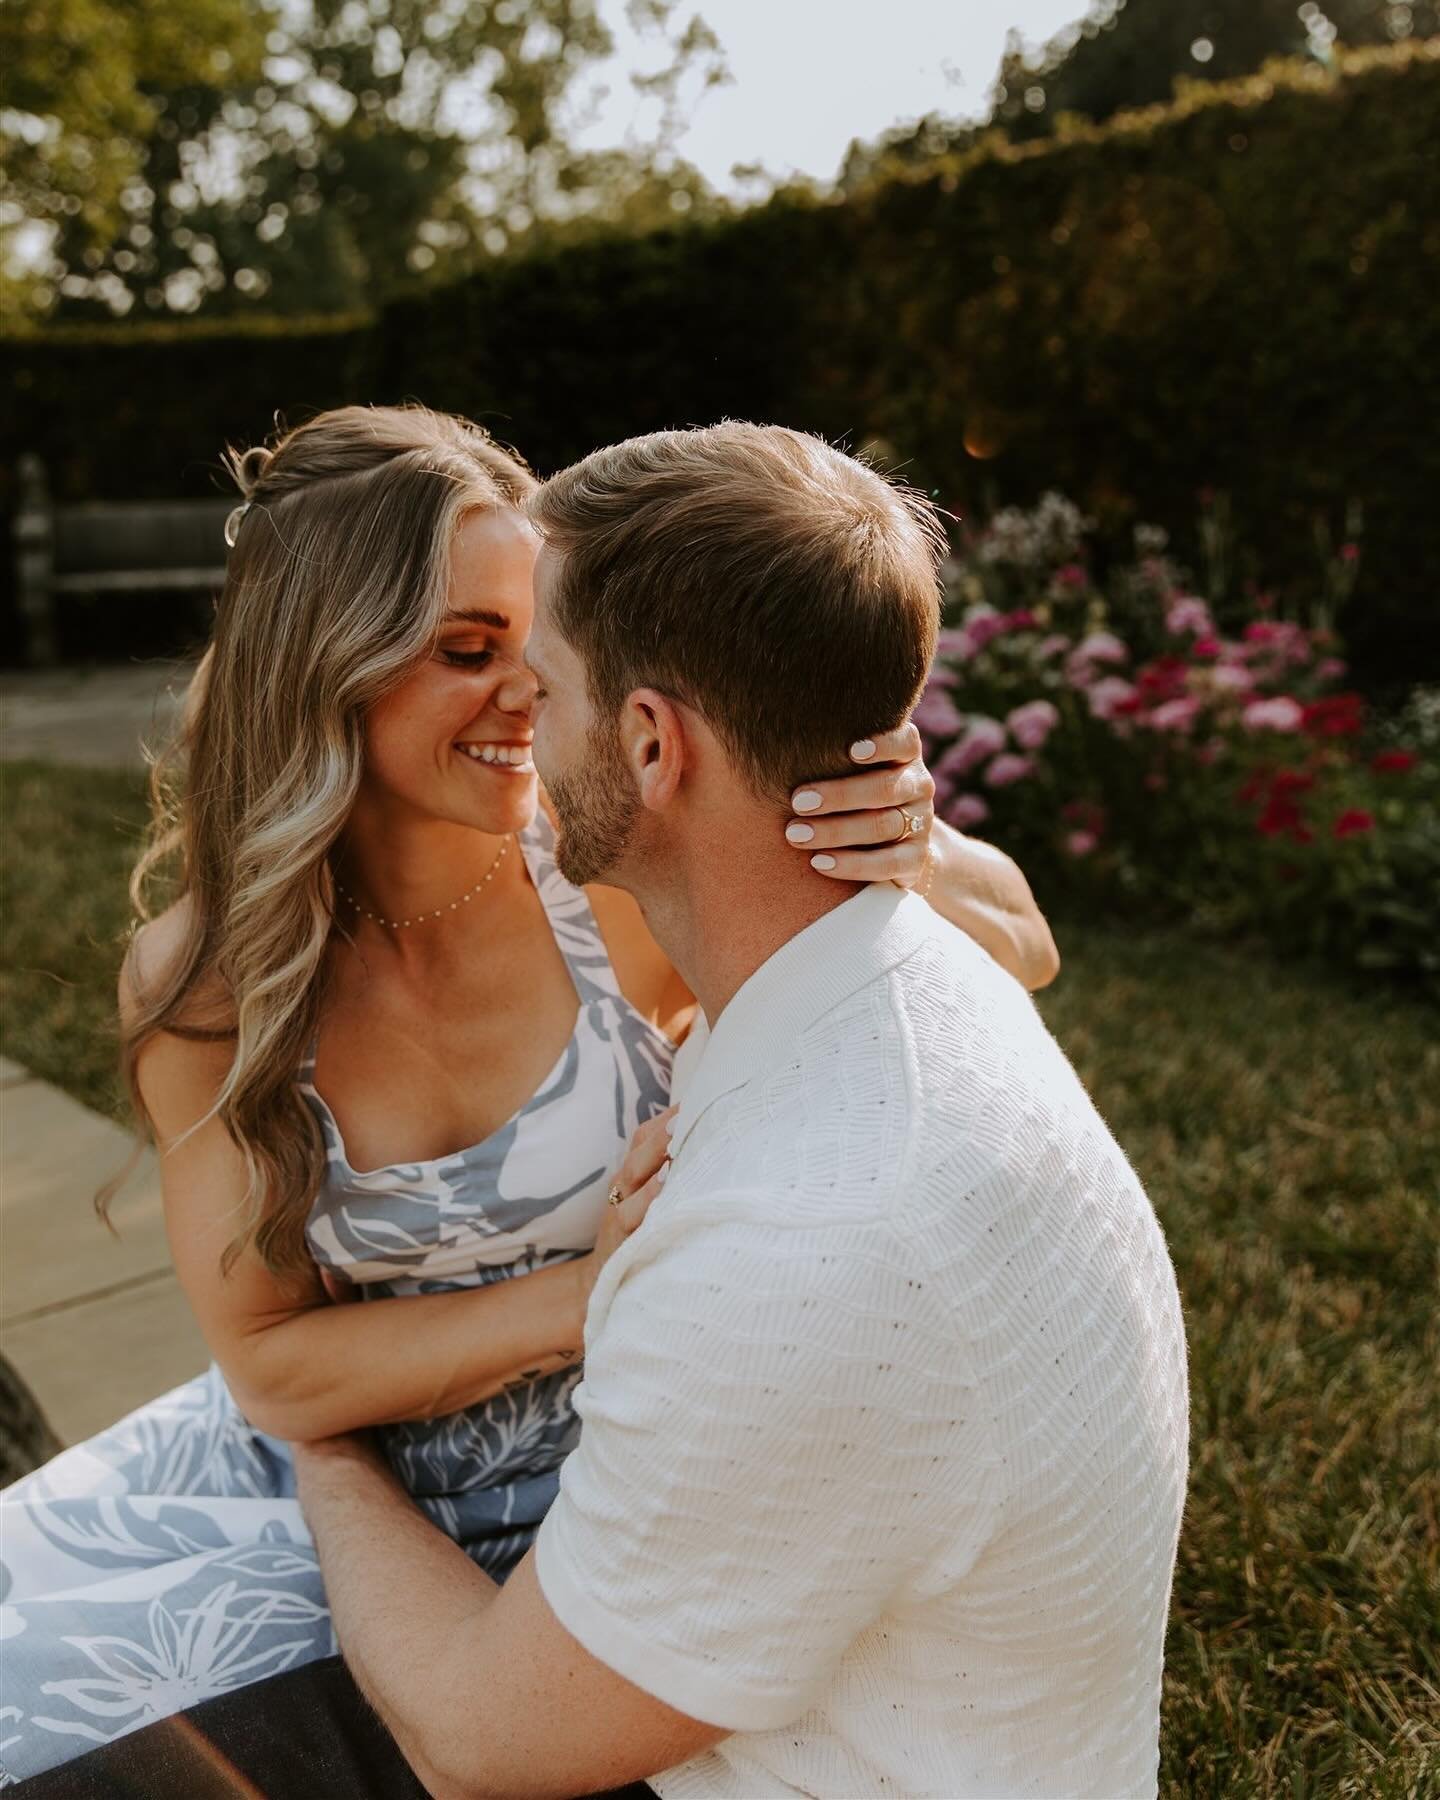 Newfields is always giving the perfect backdrops for engagement shoots 🌸
.
.
.
.
#indianapolisphotographer #indianapolisweddingphotographer #indianaweddingphotographer #indyweddingphotographer #indyengagement #indianapolisindiana #indianapolisengage